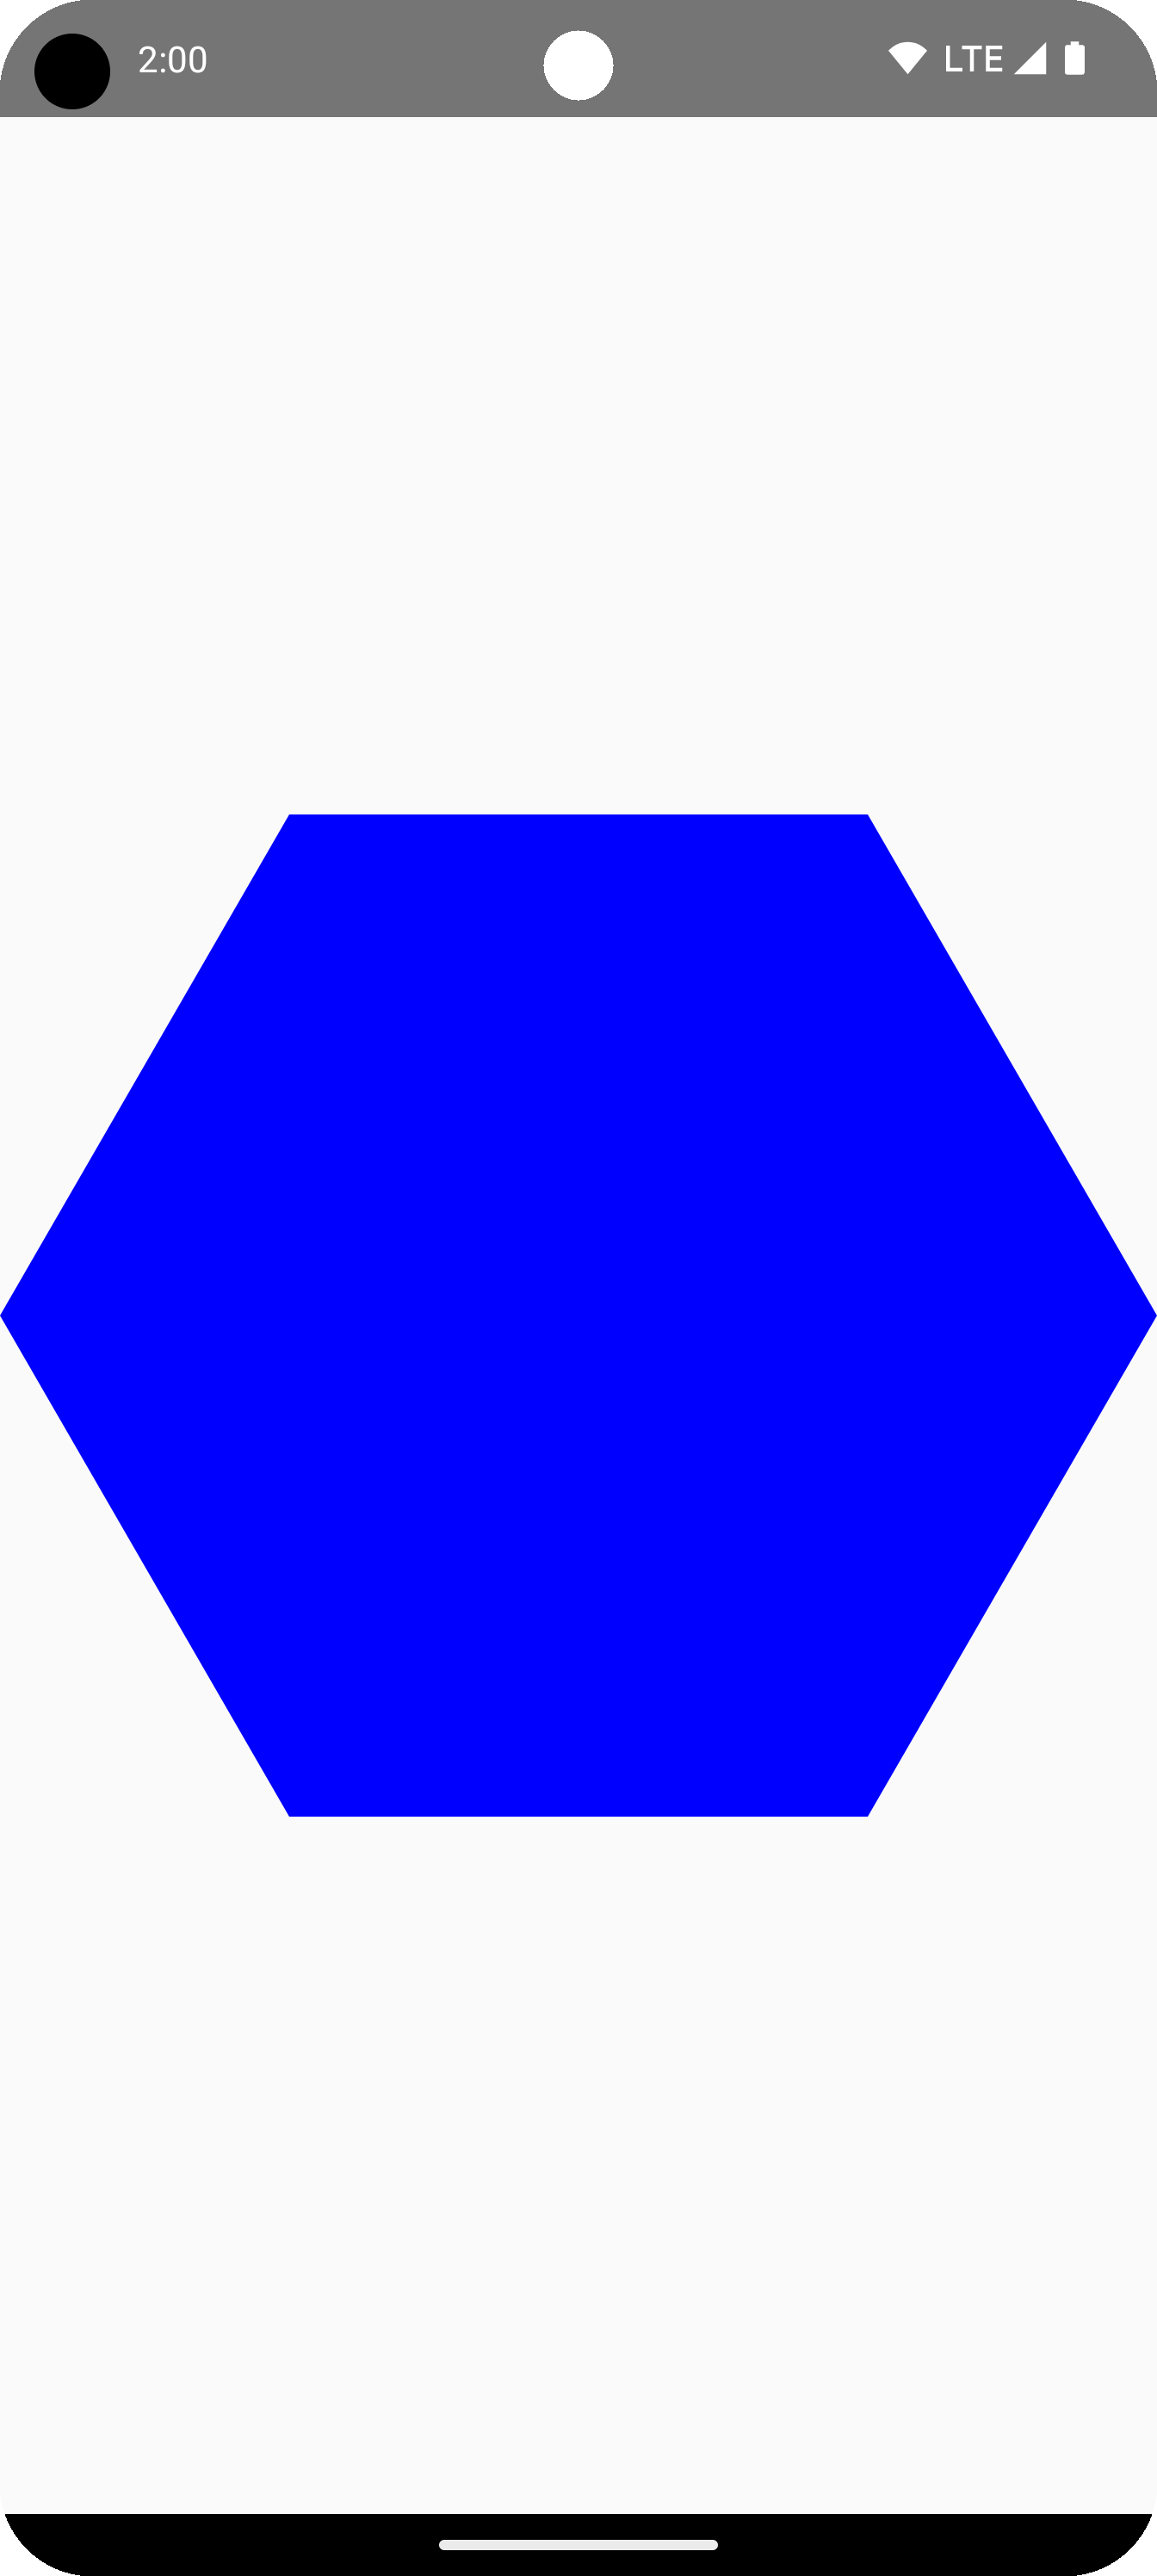 Blue hexagon in the center of the drawing area